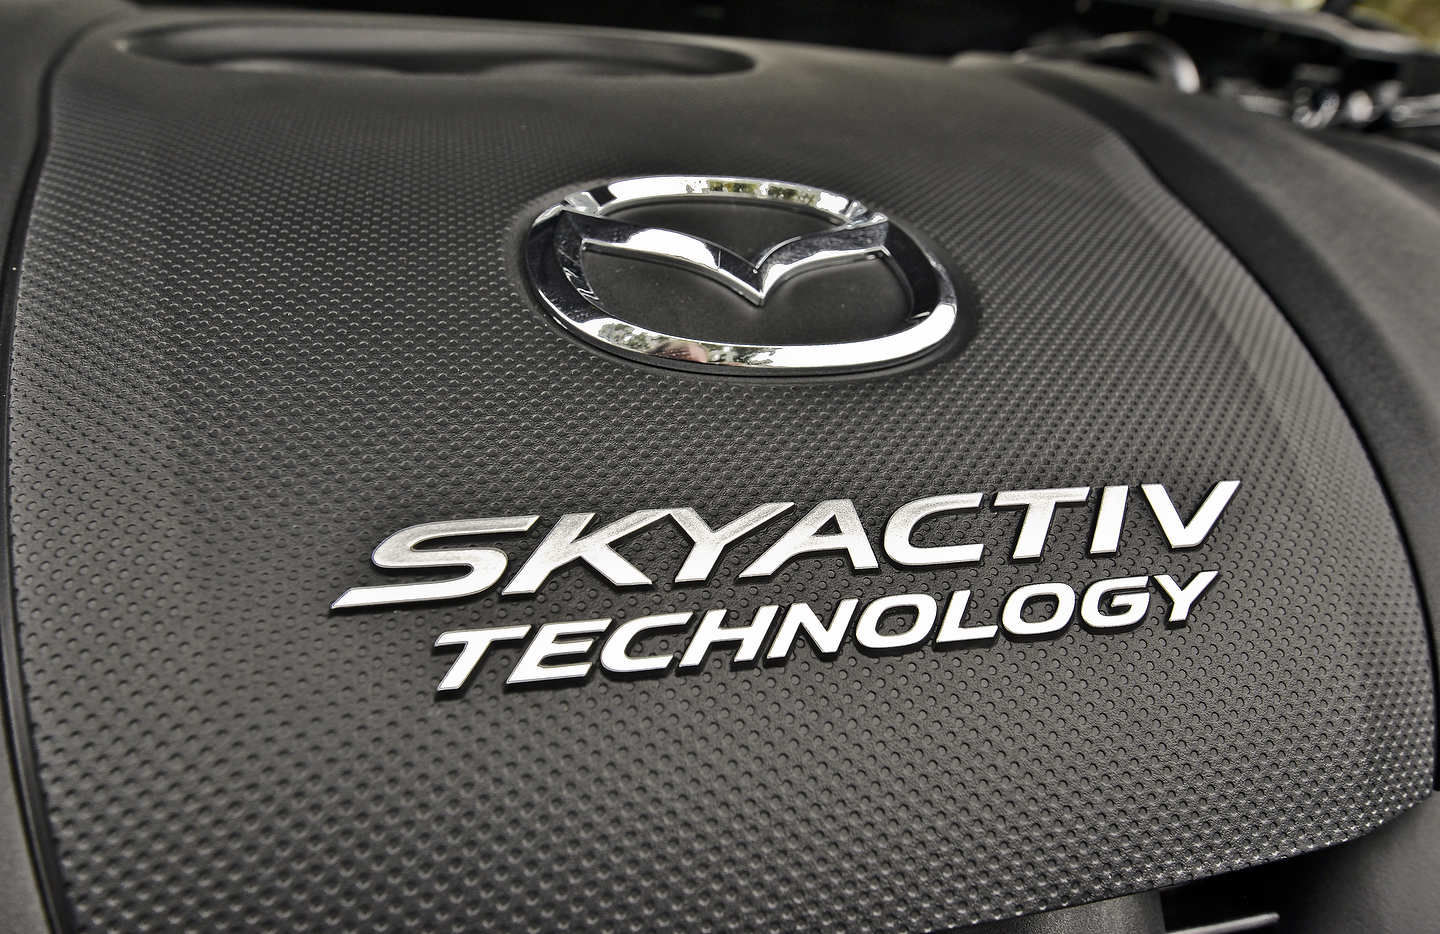 Three things worth knowing about Mazda SKYACTIV technology